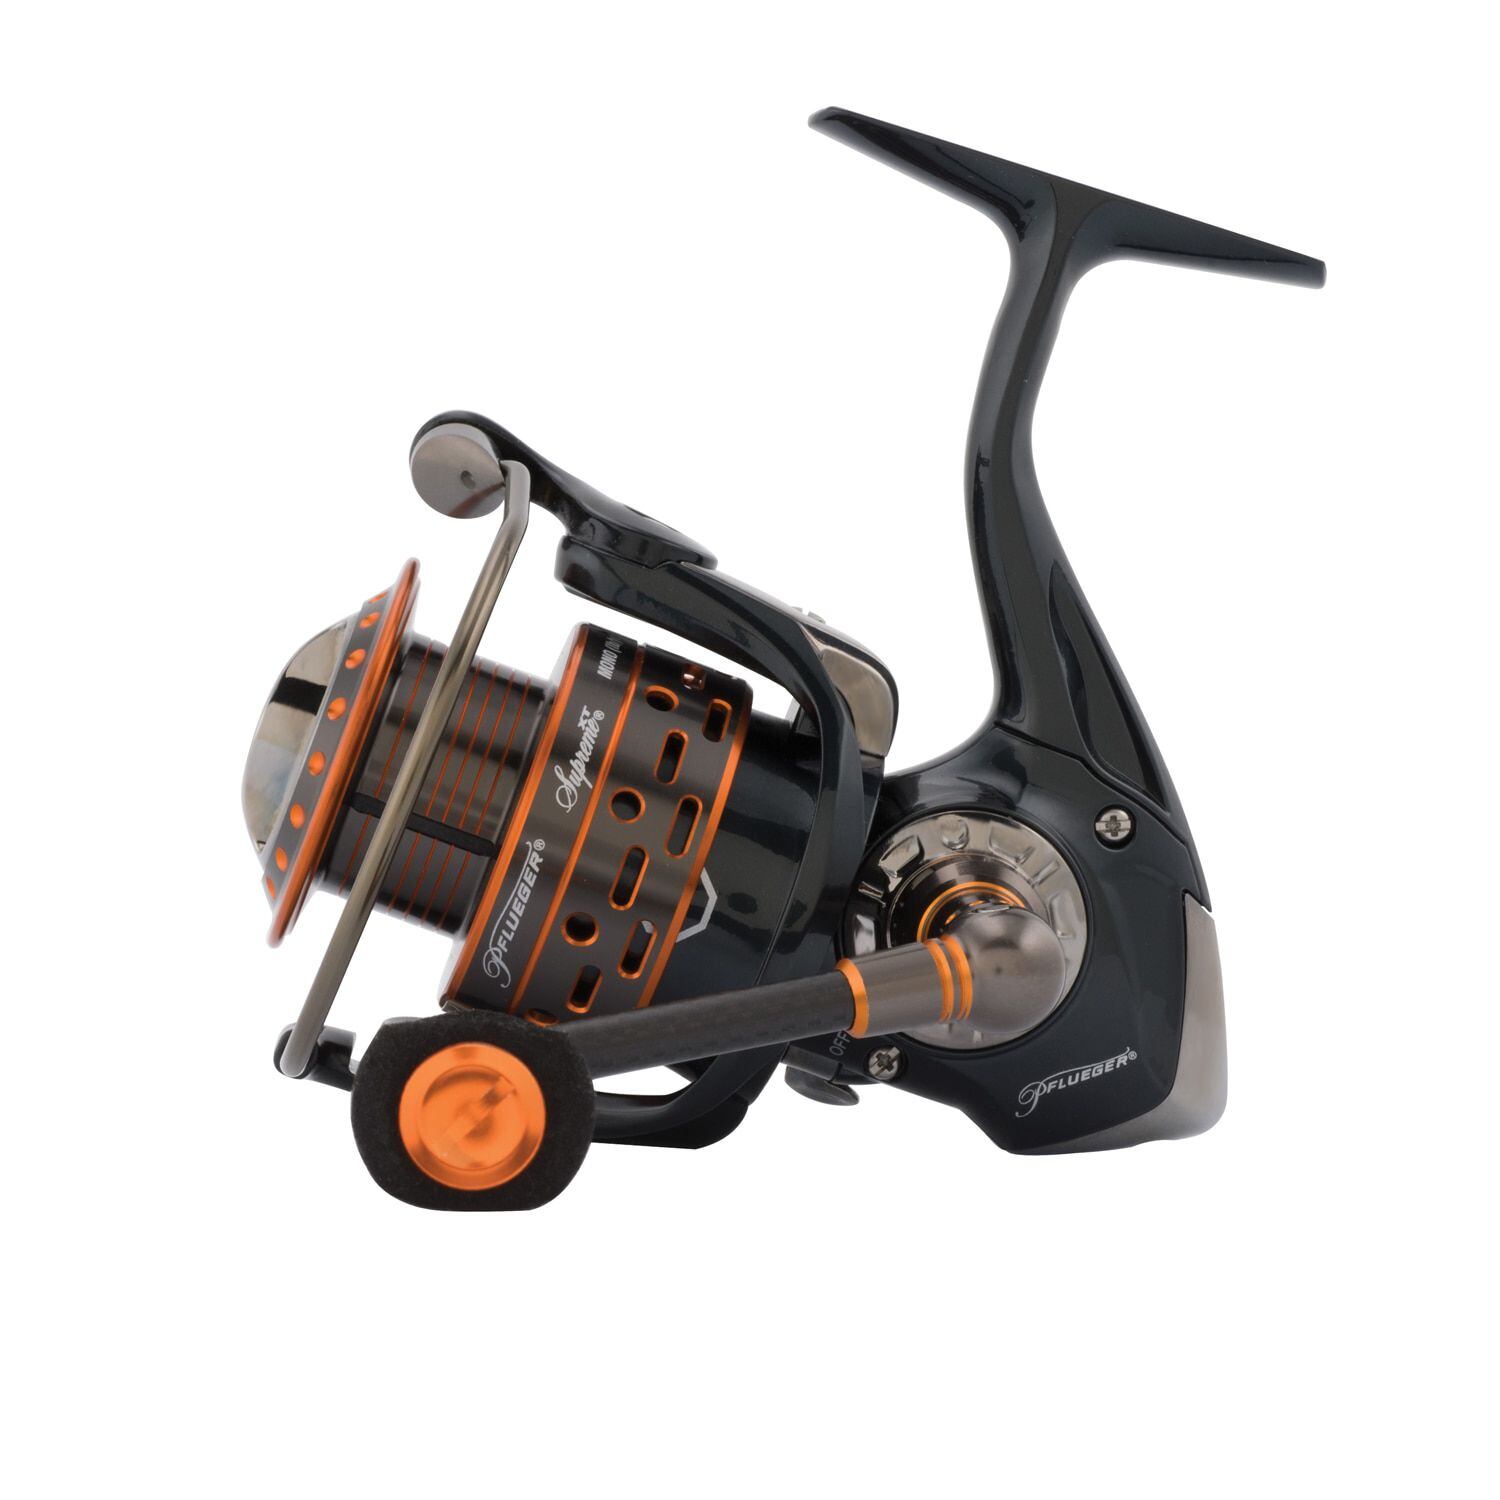 GearScout: Fishing easy and fishing on the go